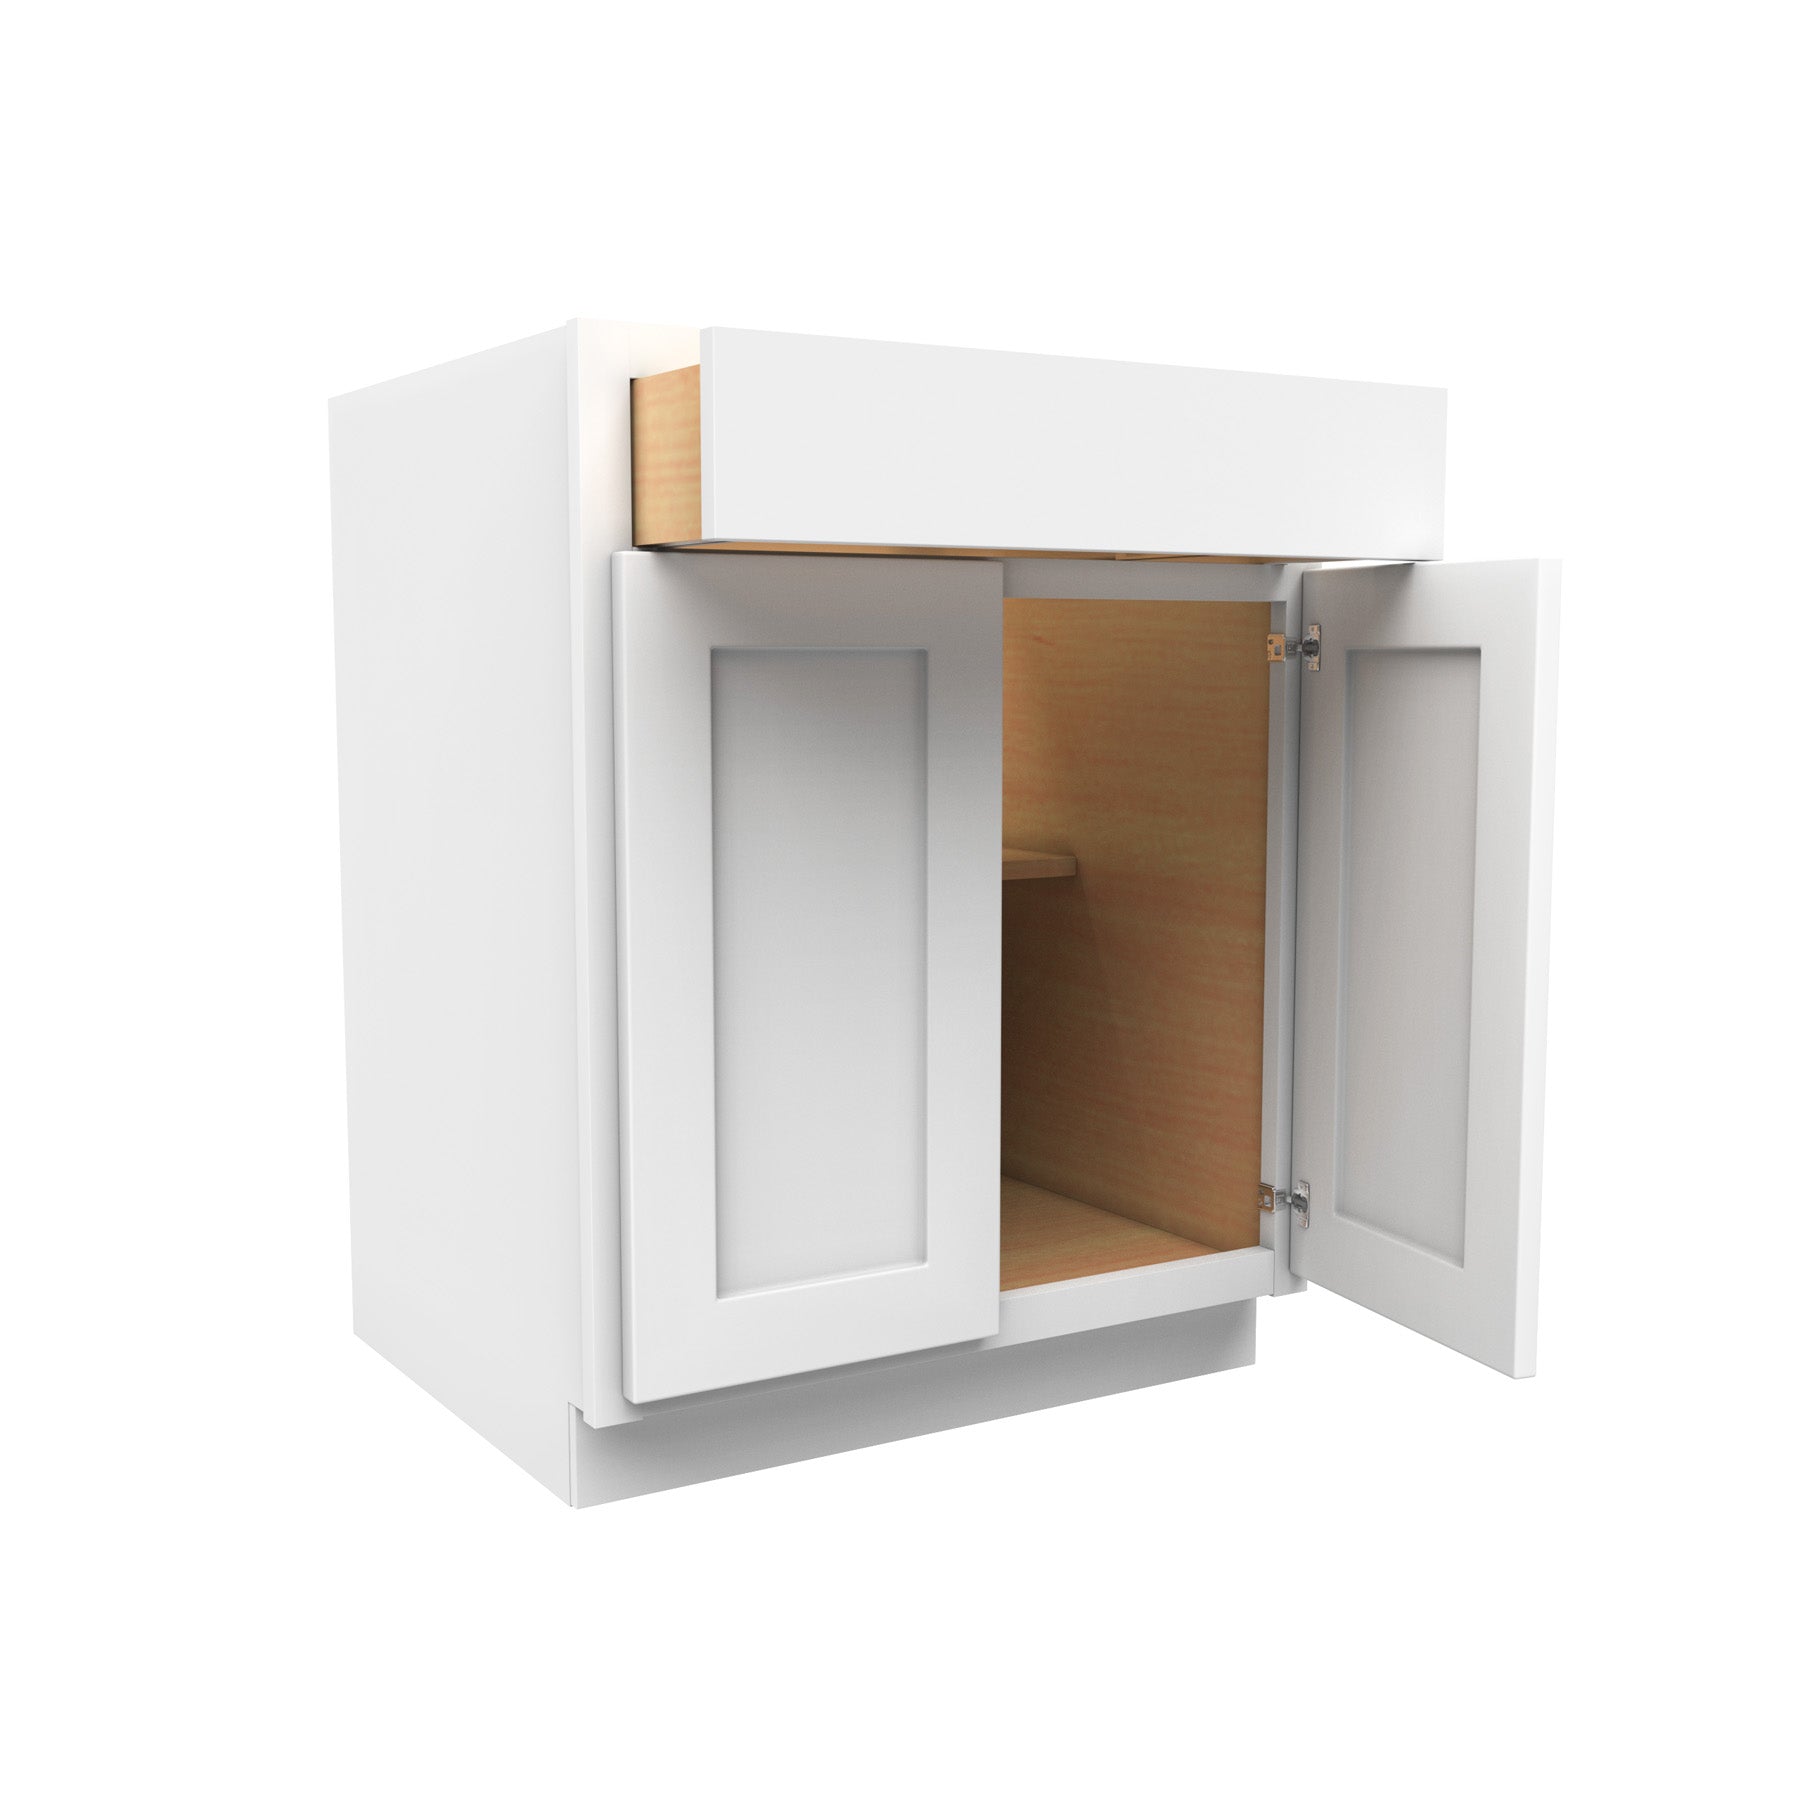 27 Inch Wide Accessible ADA - Double Door Base Cabinet - Luxor White Shaker  - Ready To Assemble, 27W x 32.5H x 24D